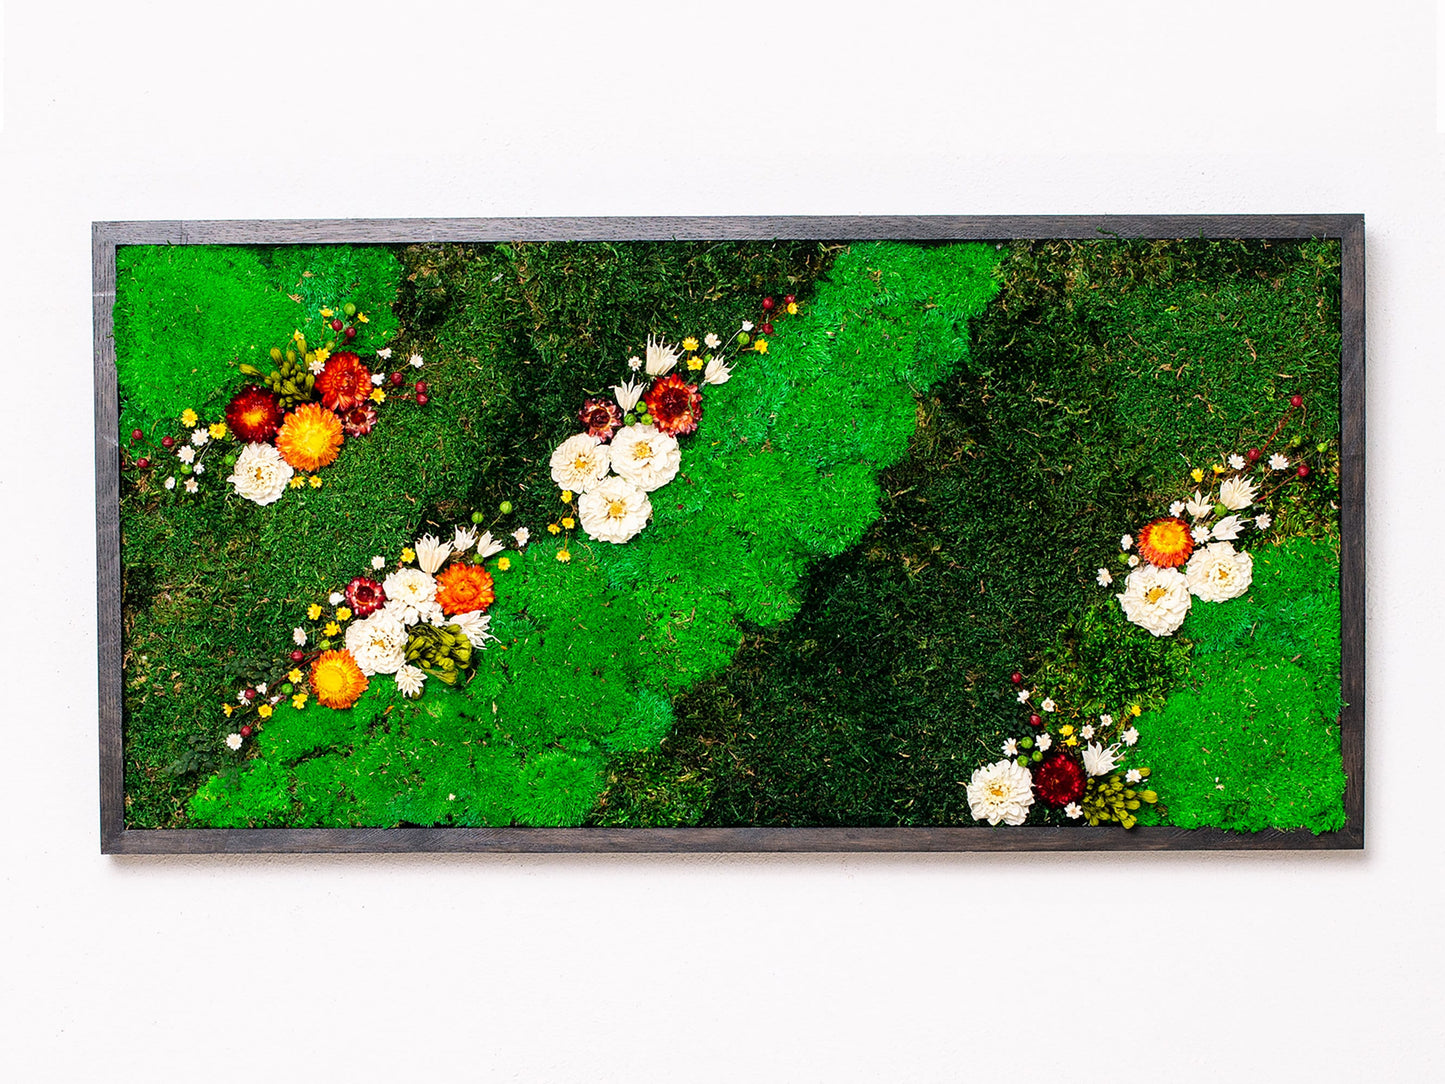 Transform Your Living Space: Framed Moss Art - The Ultimate Interior Gift Idea!